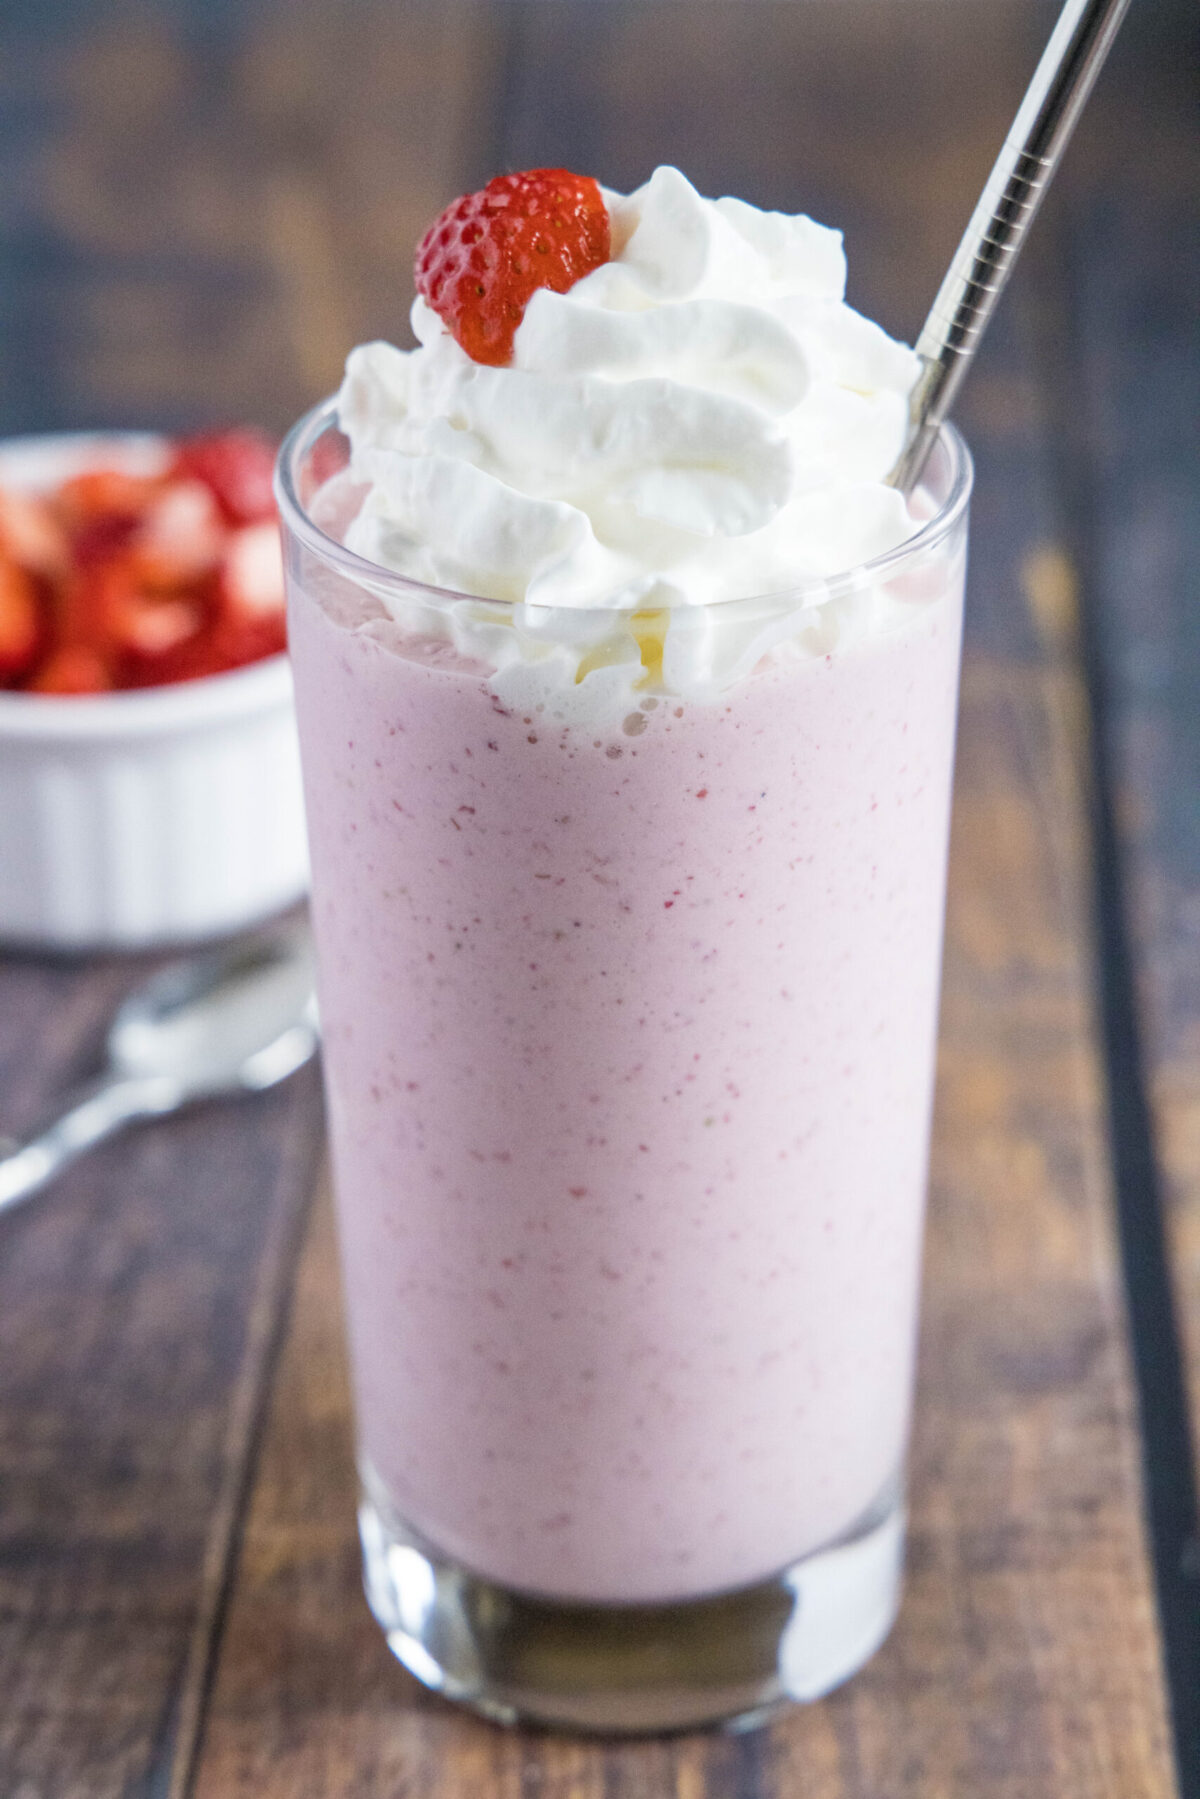 Close up of a glass of strawberry milkshake with whipped cream, a strawberry garnish, and a straw